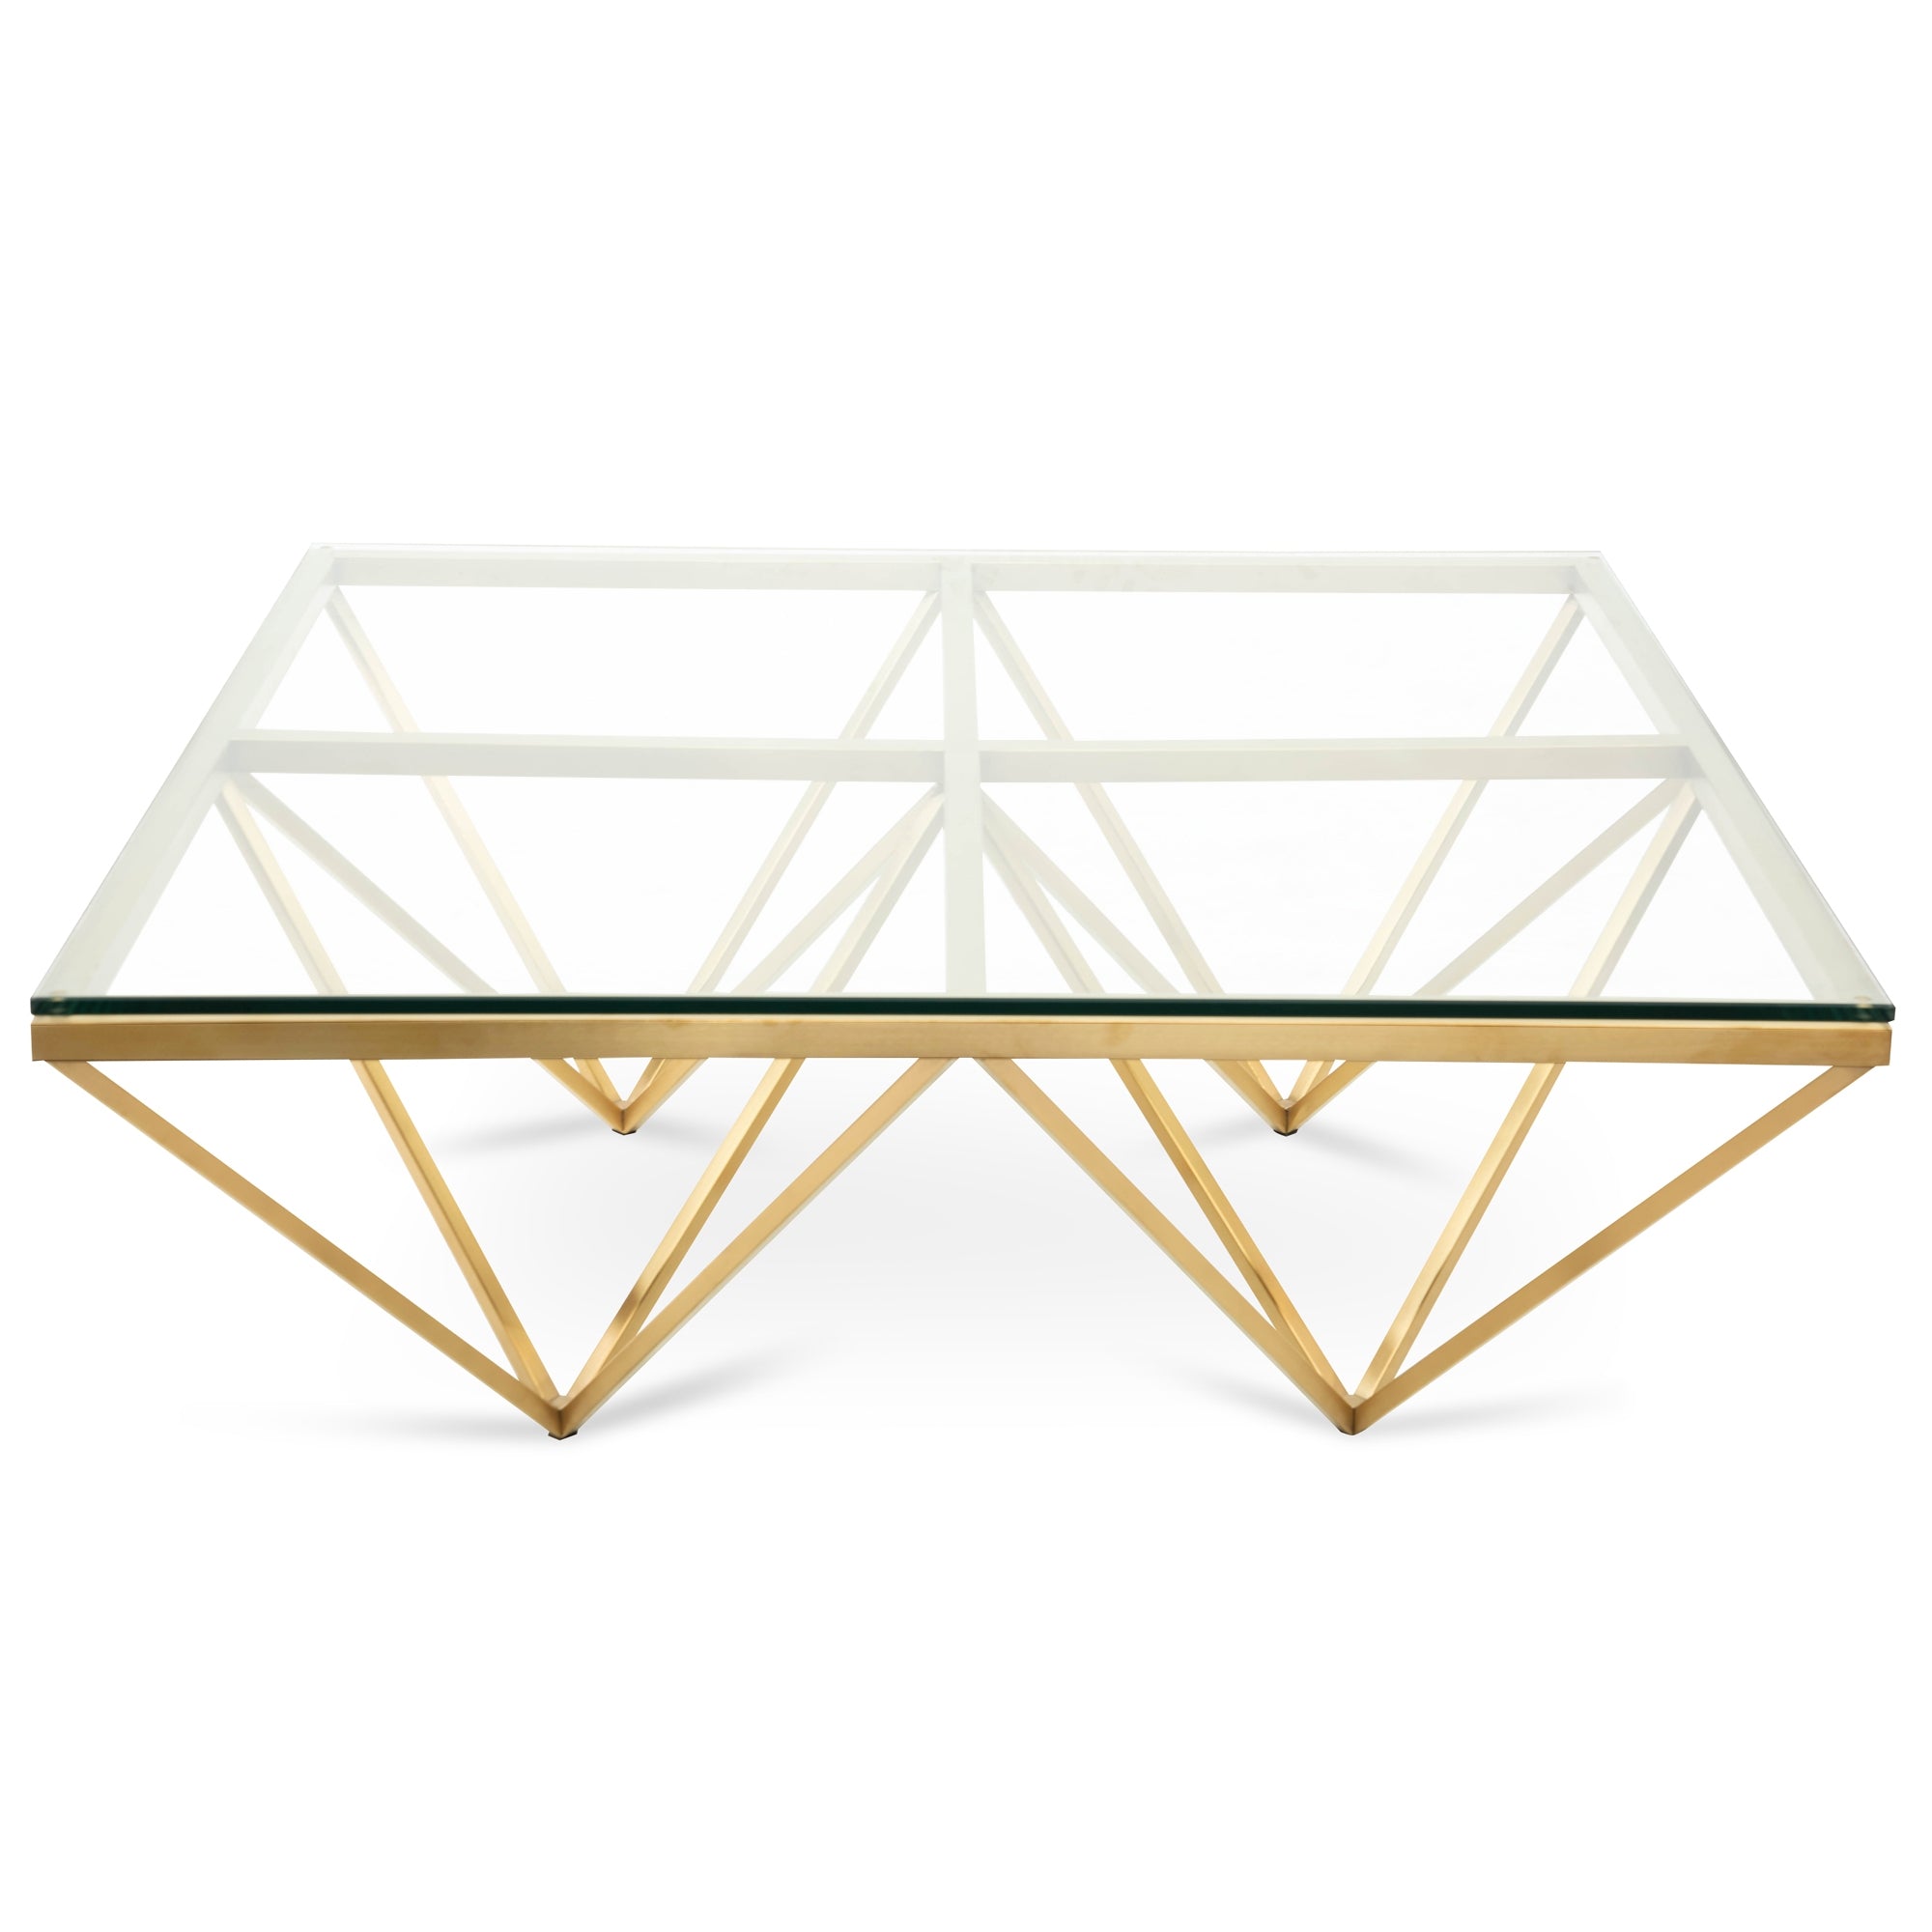 1.05m Glass Coffee Table - Brushed Gold Base_1